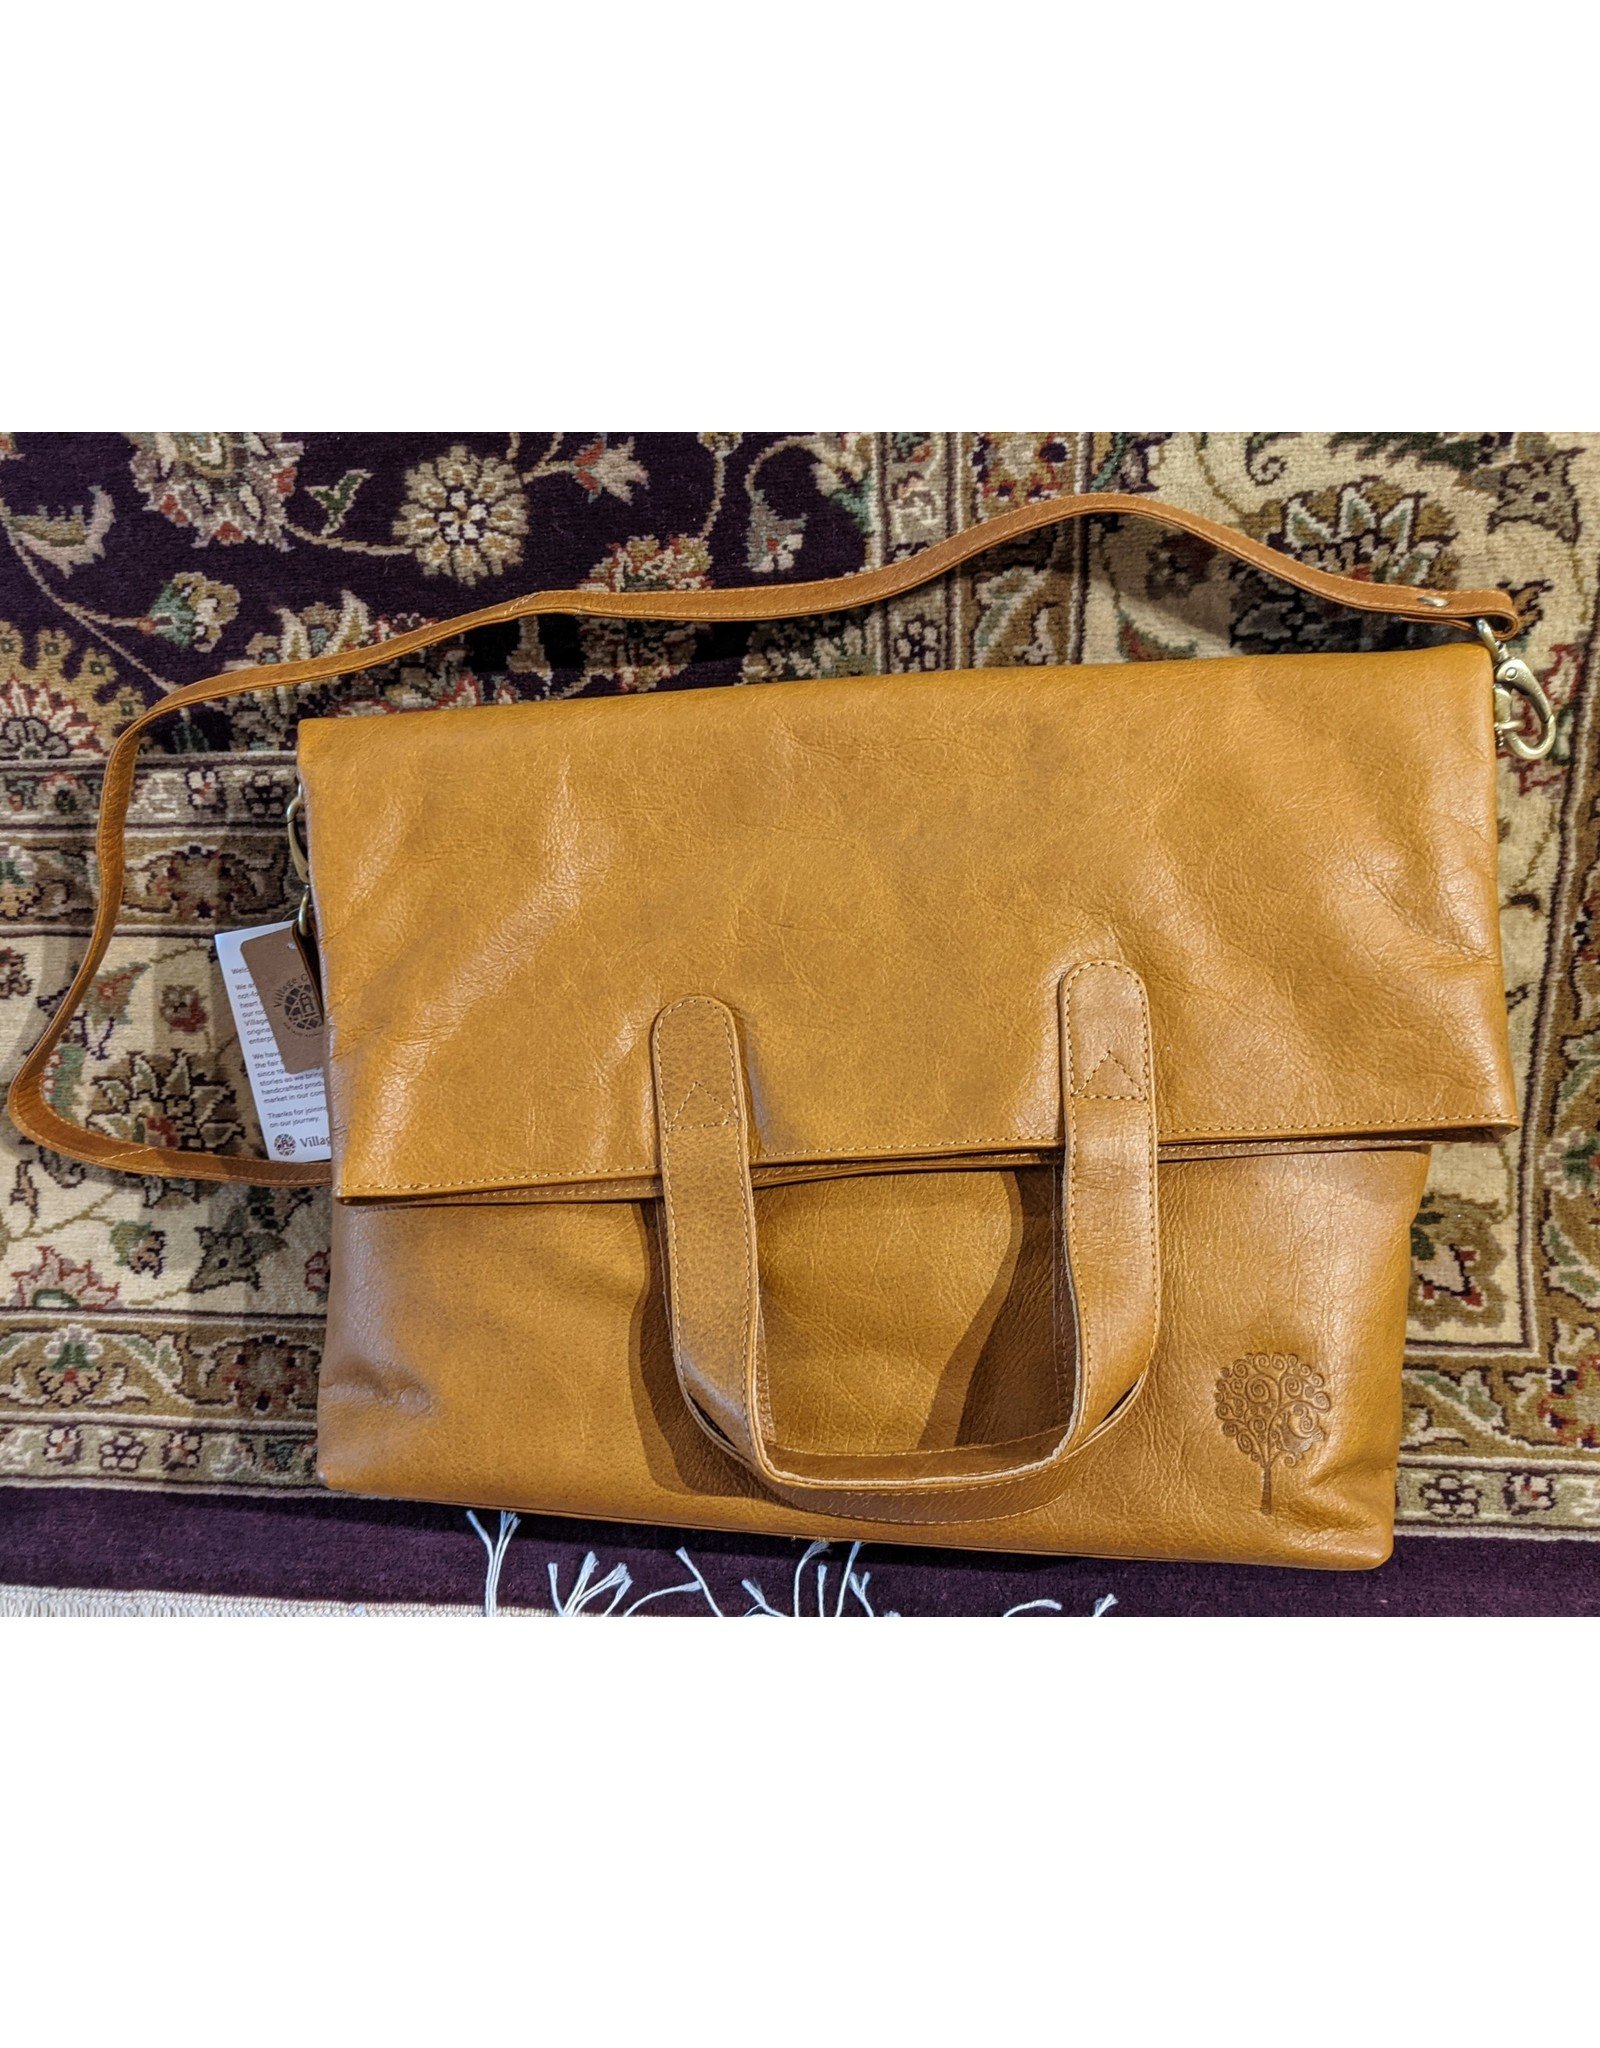 Ten Thousand Villages CLEARANCE Eco-Leather Shoulder Bag, India